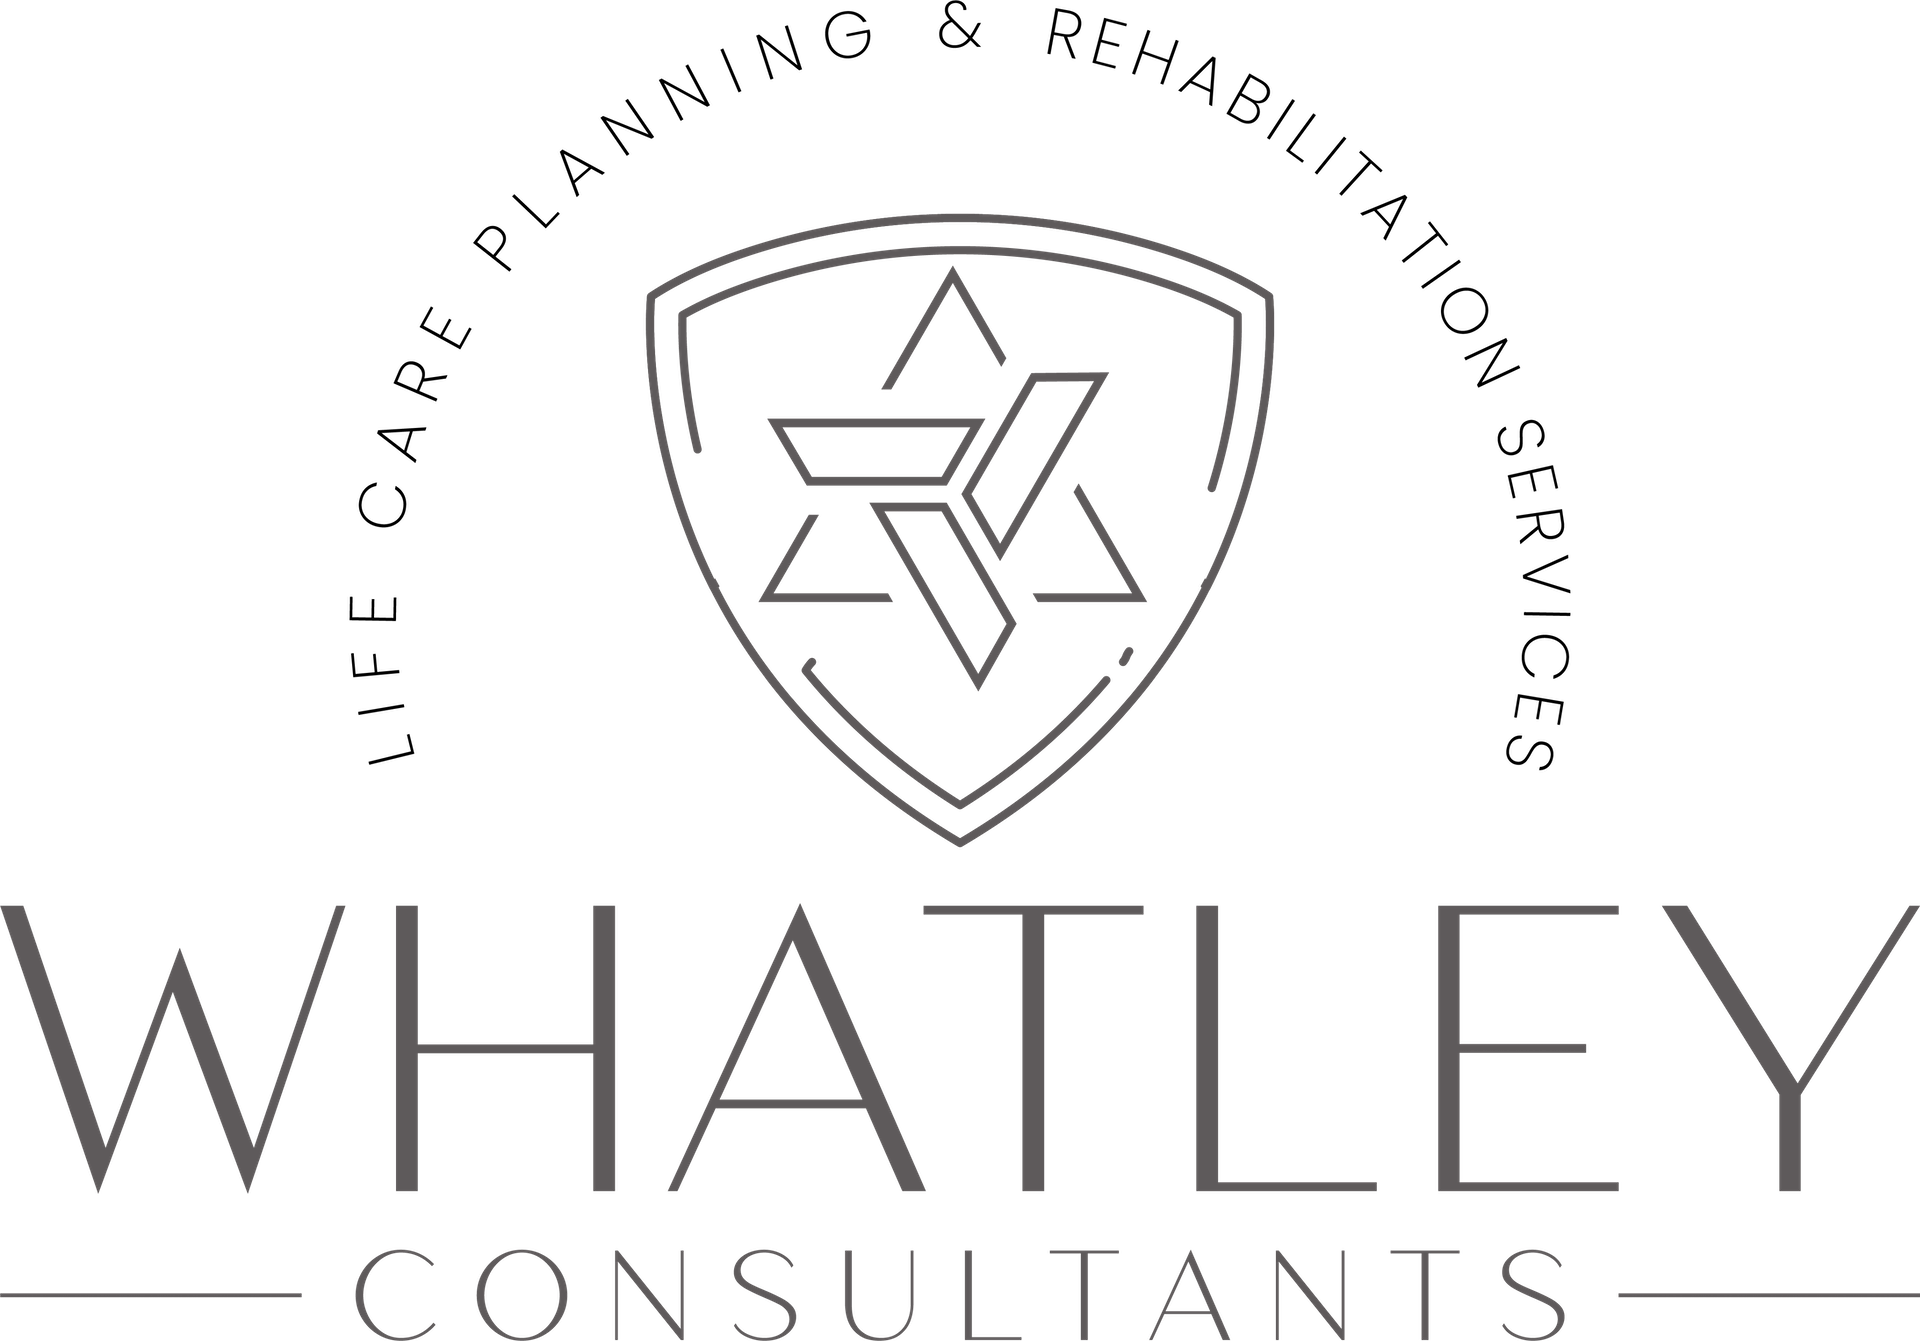 Courtney Whatley MA, CLCP, CRC, CLVT, CVRT (Whatley Consultants)